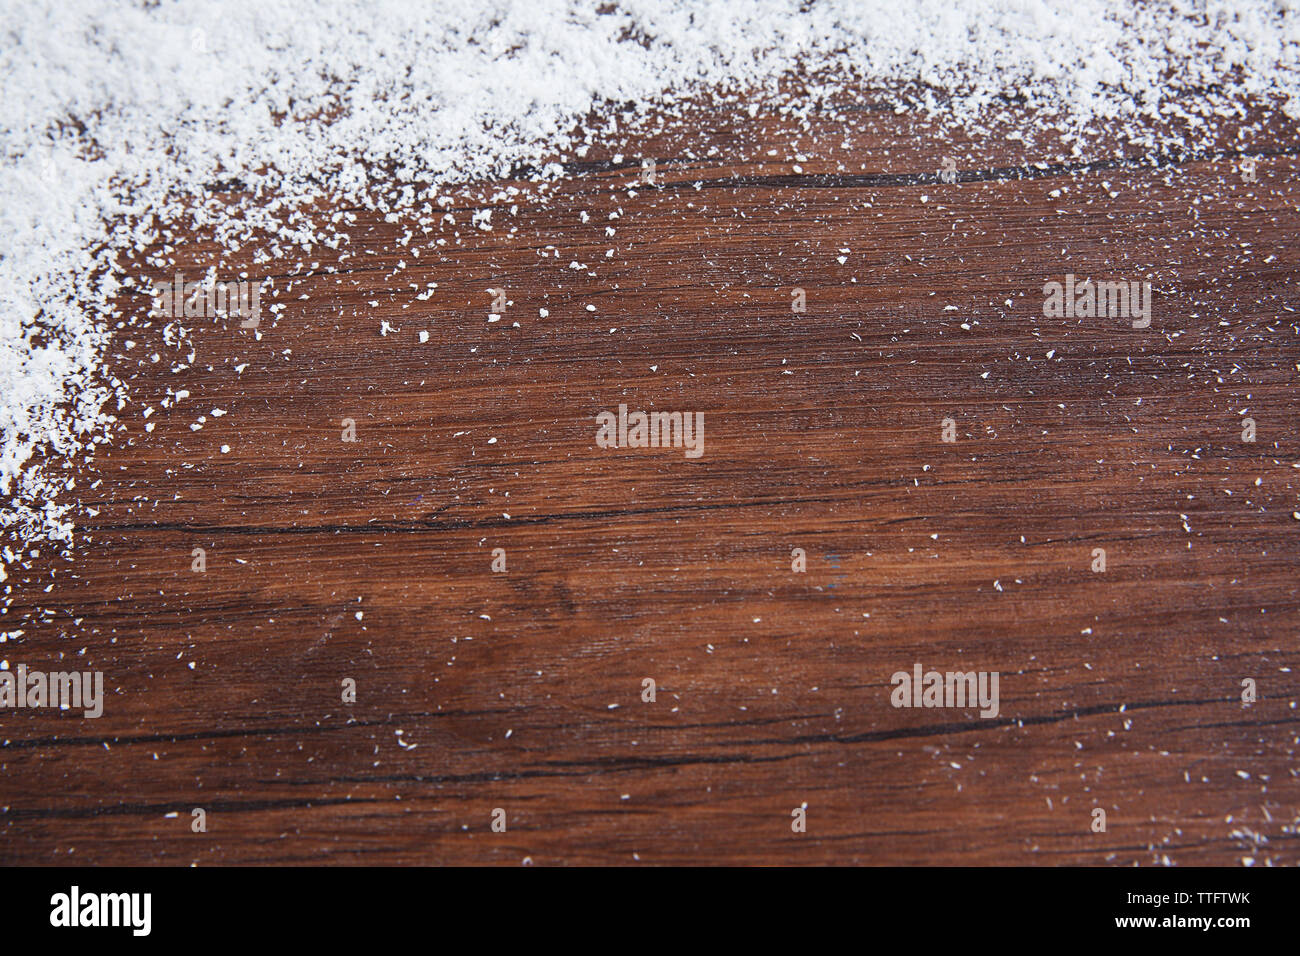 Snowy brown wooden background Banque D'Images